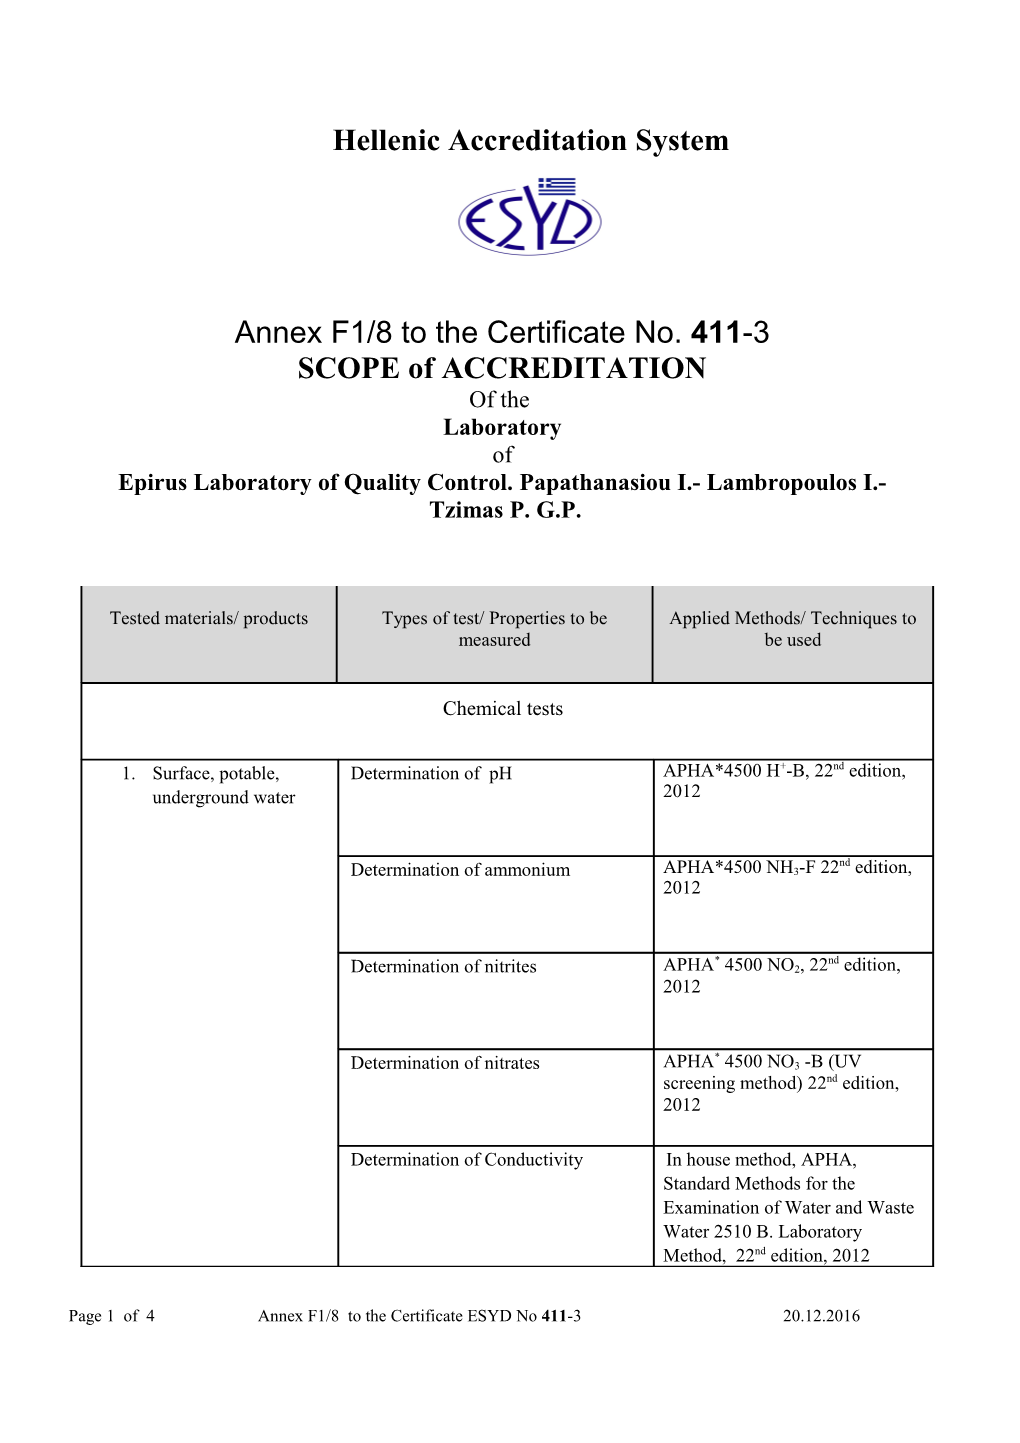 Annex F1/8 to the Certificate No. 411-3